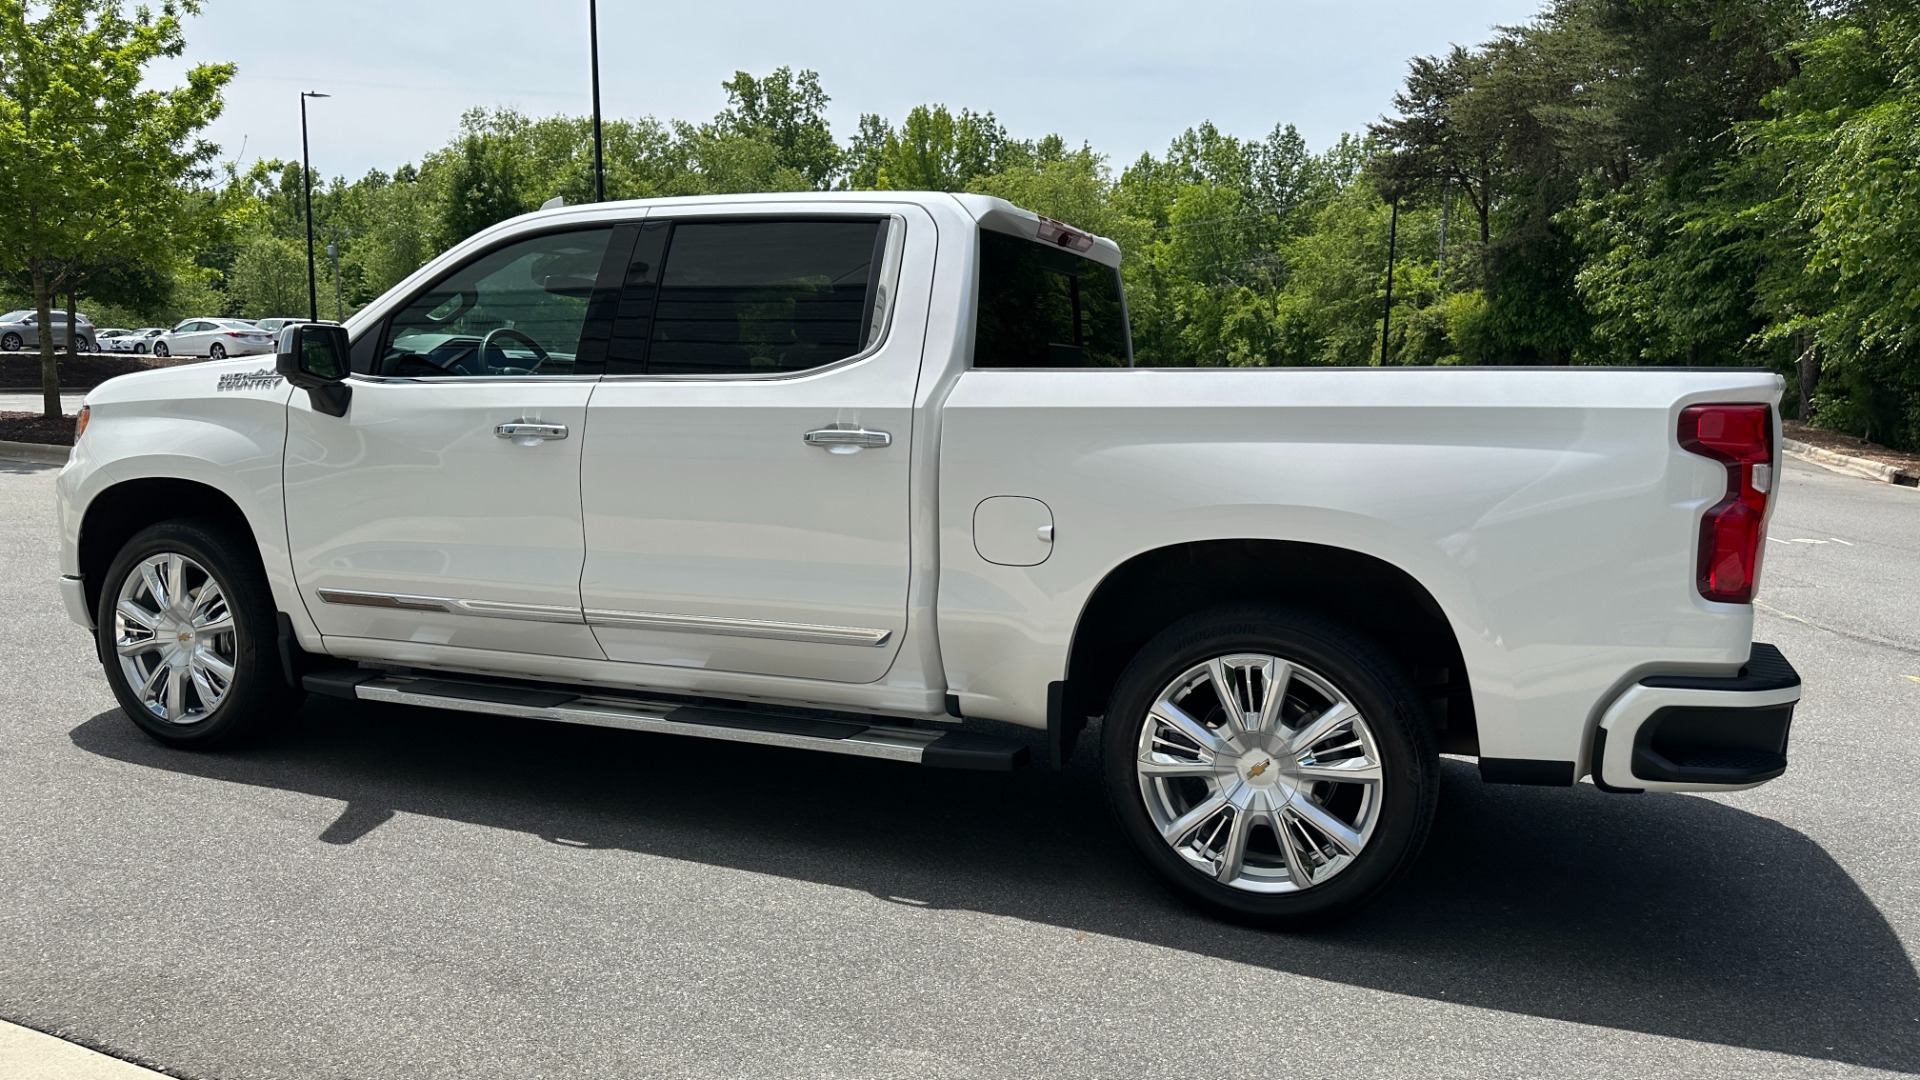 Used 2022 Chevrolet Silverado 1500 HIGH COUNTRY PREMIUM / PEARL PAINT / ADAPTIVE RIDE / MULTIFLEX TAIL GATE for sale $62,500 at Formula Imports in Charlotte NC 28227 4